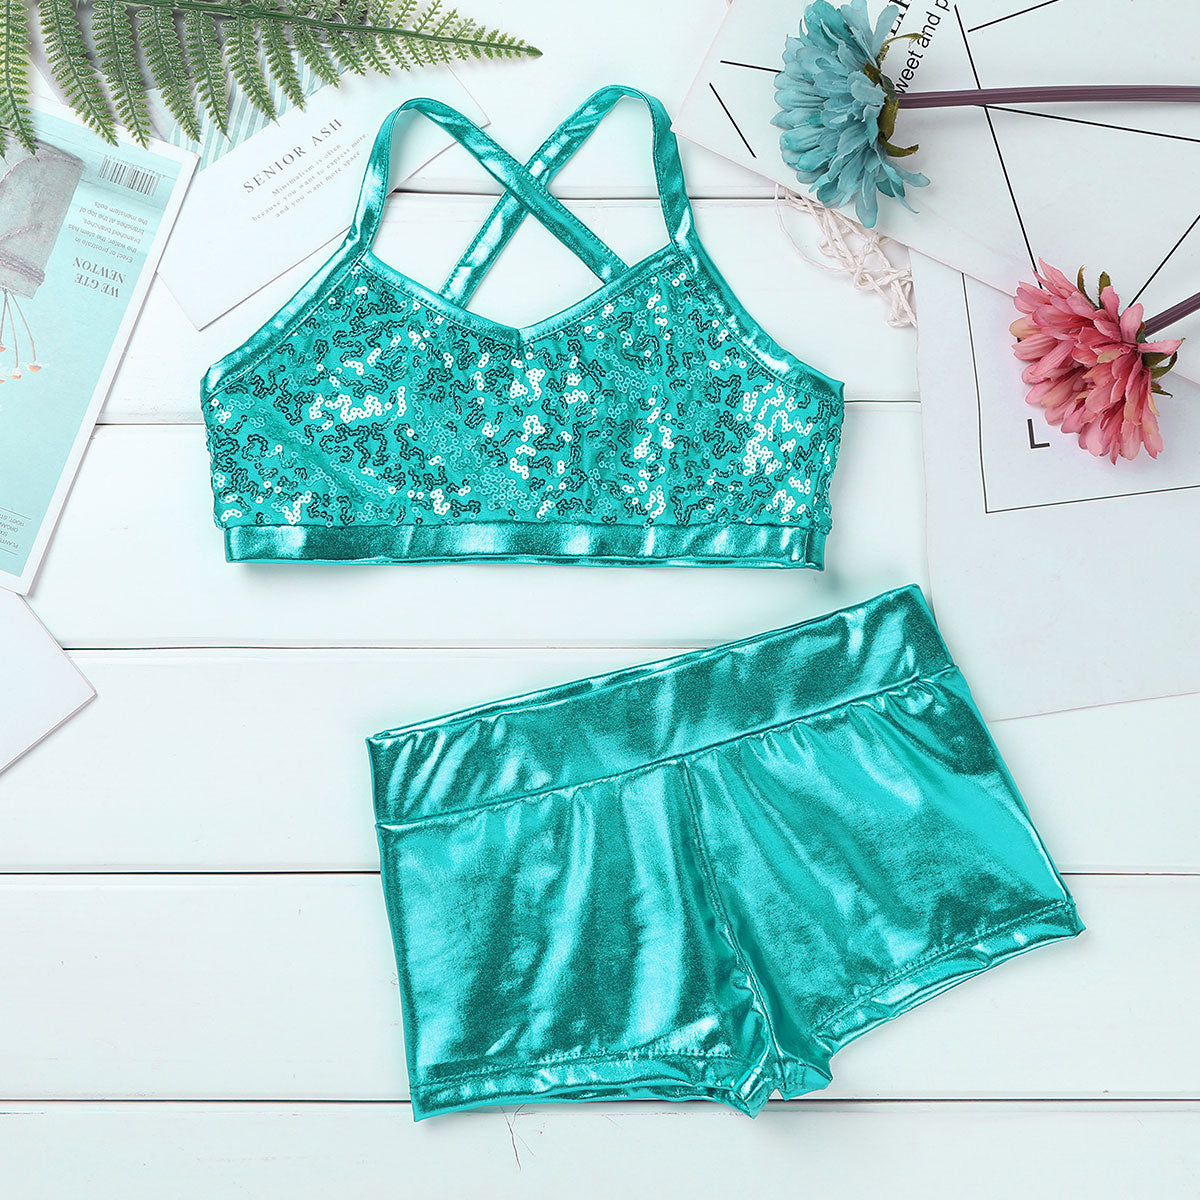 Barbra Girls Sequins Crop Top and Dance Pants Shorts Set Available in 5 Colors and Ages 5-14